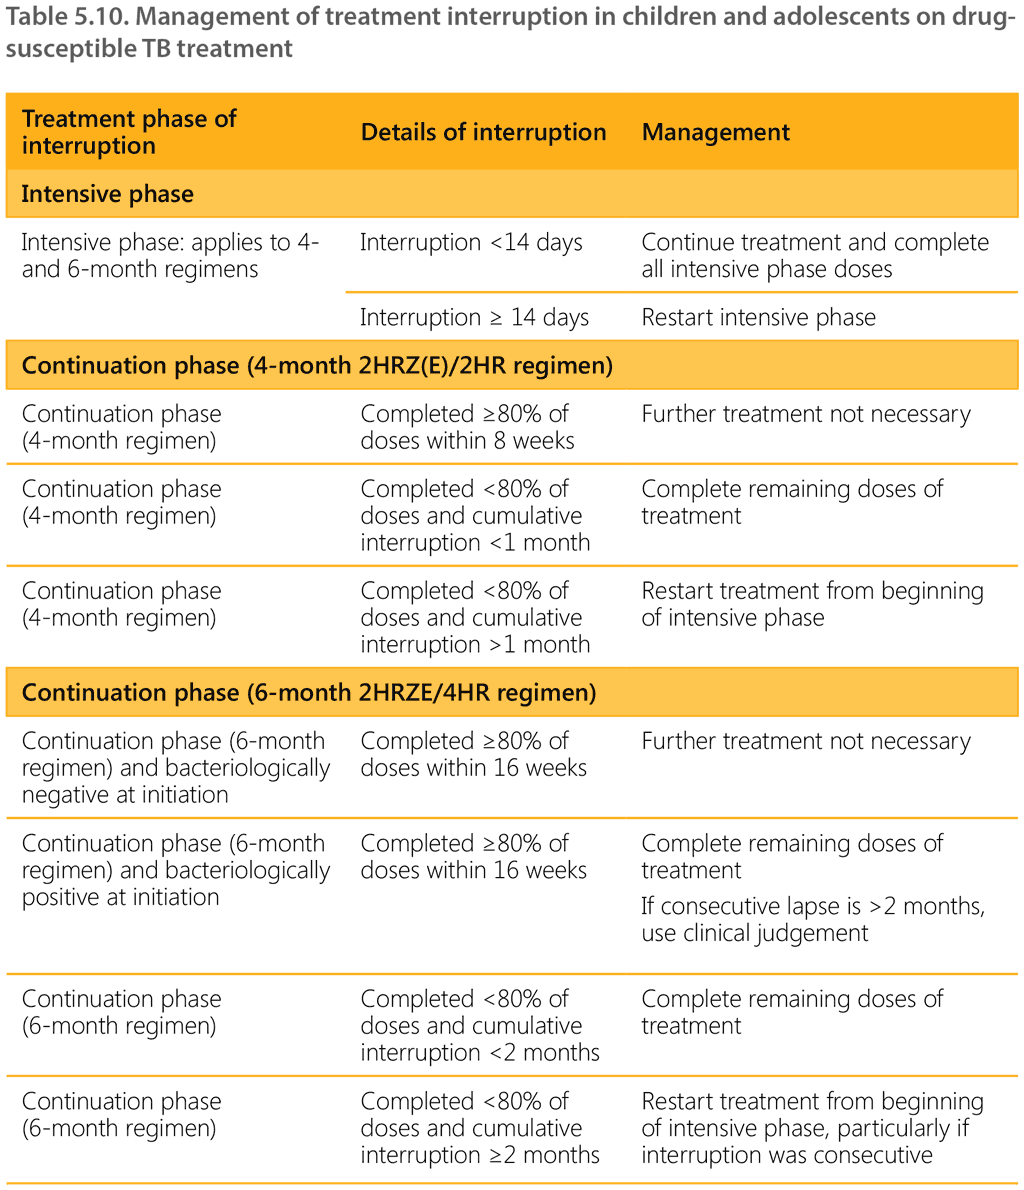 Table 5.10. Management of treatment interruption in children and adolescents on drugsusceptible TB treatment